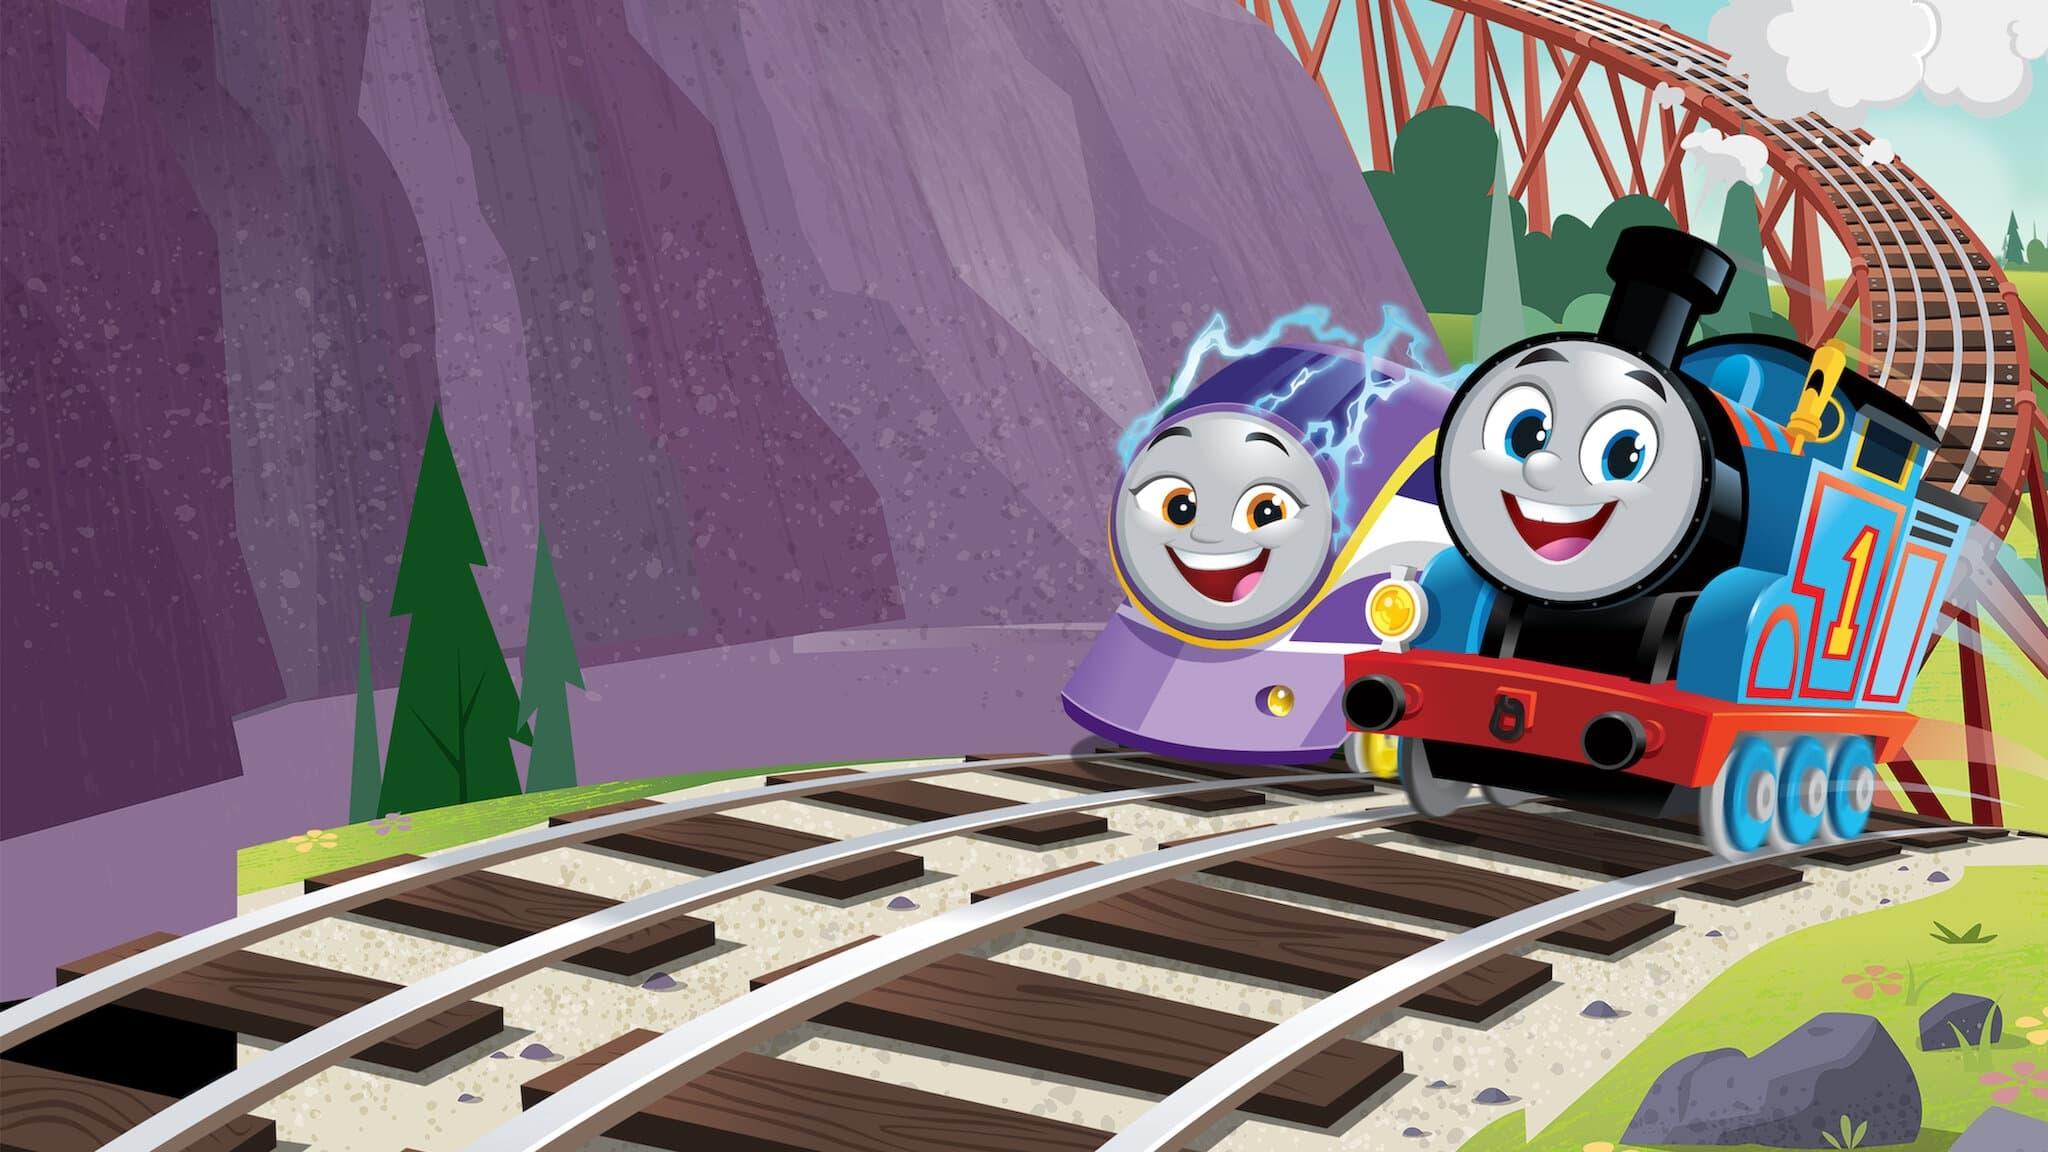 Thomas & Friends: Race for the Sodor Cup backdrop